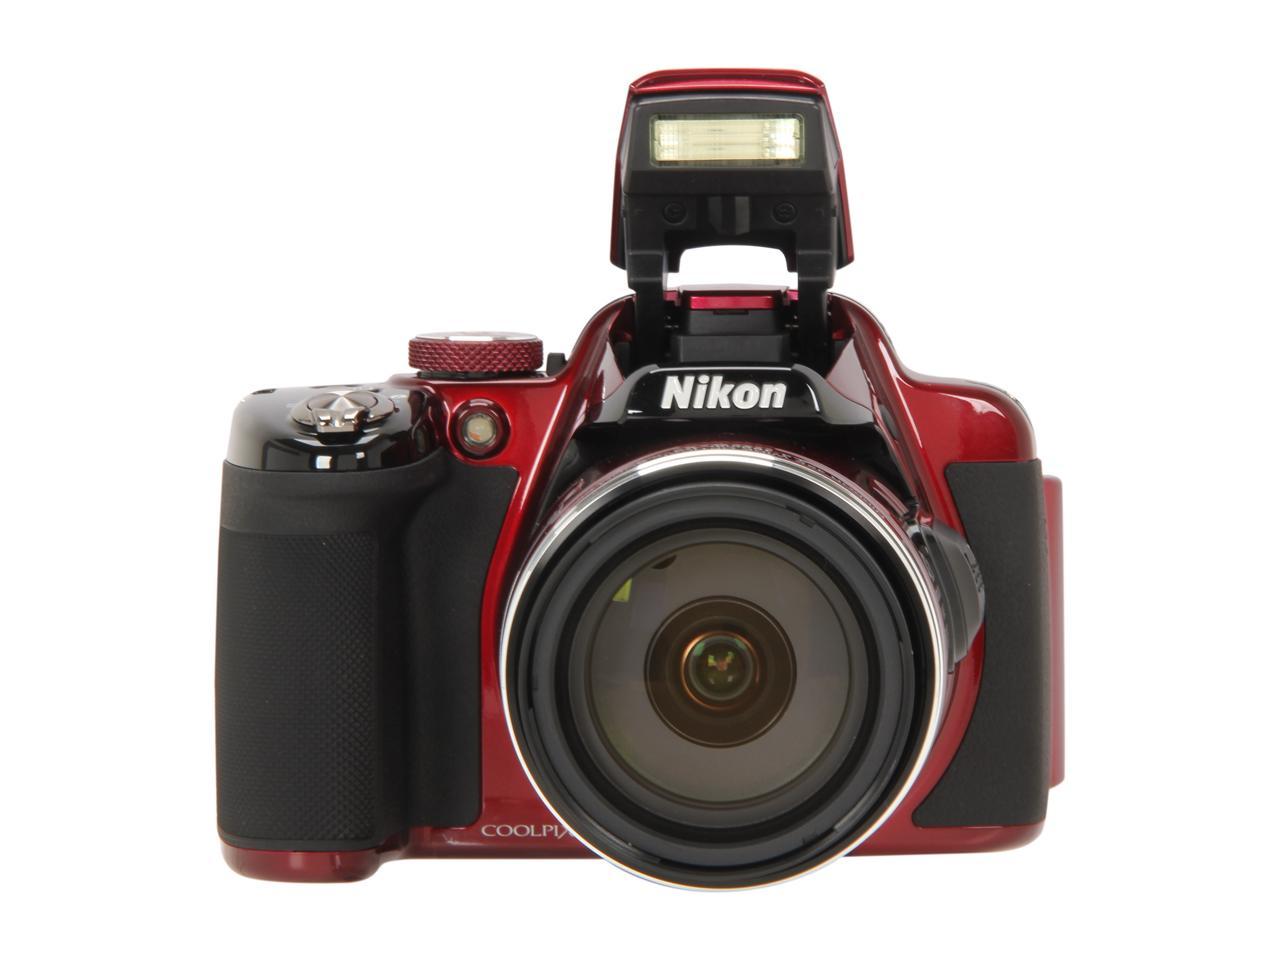 Nikon COOLPIX P520 Red 18.1 MP Wide Angle Digital Camera HDTV Output